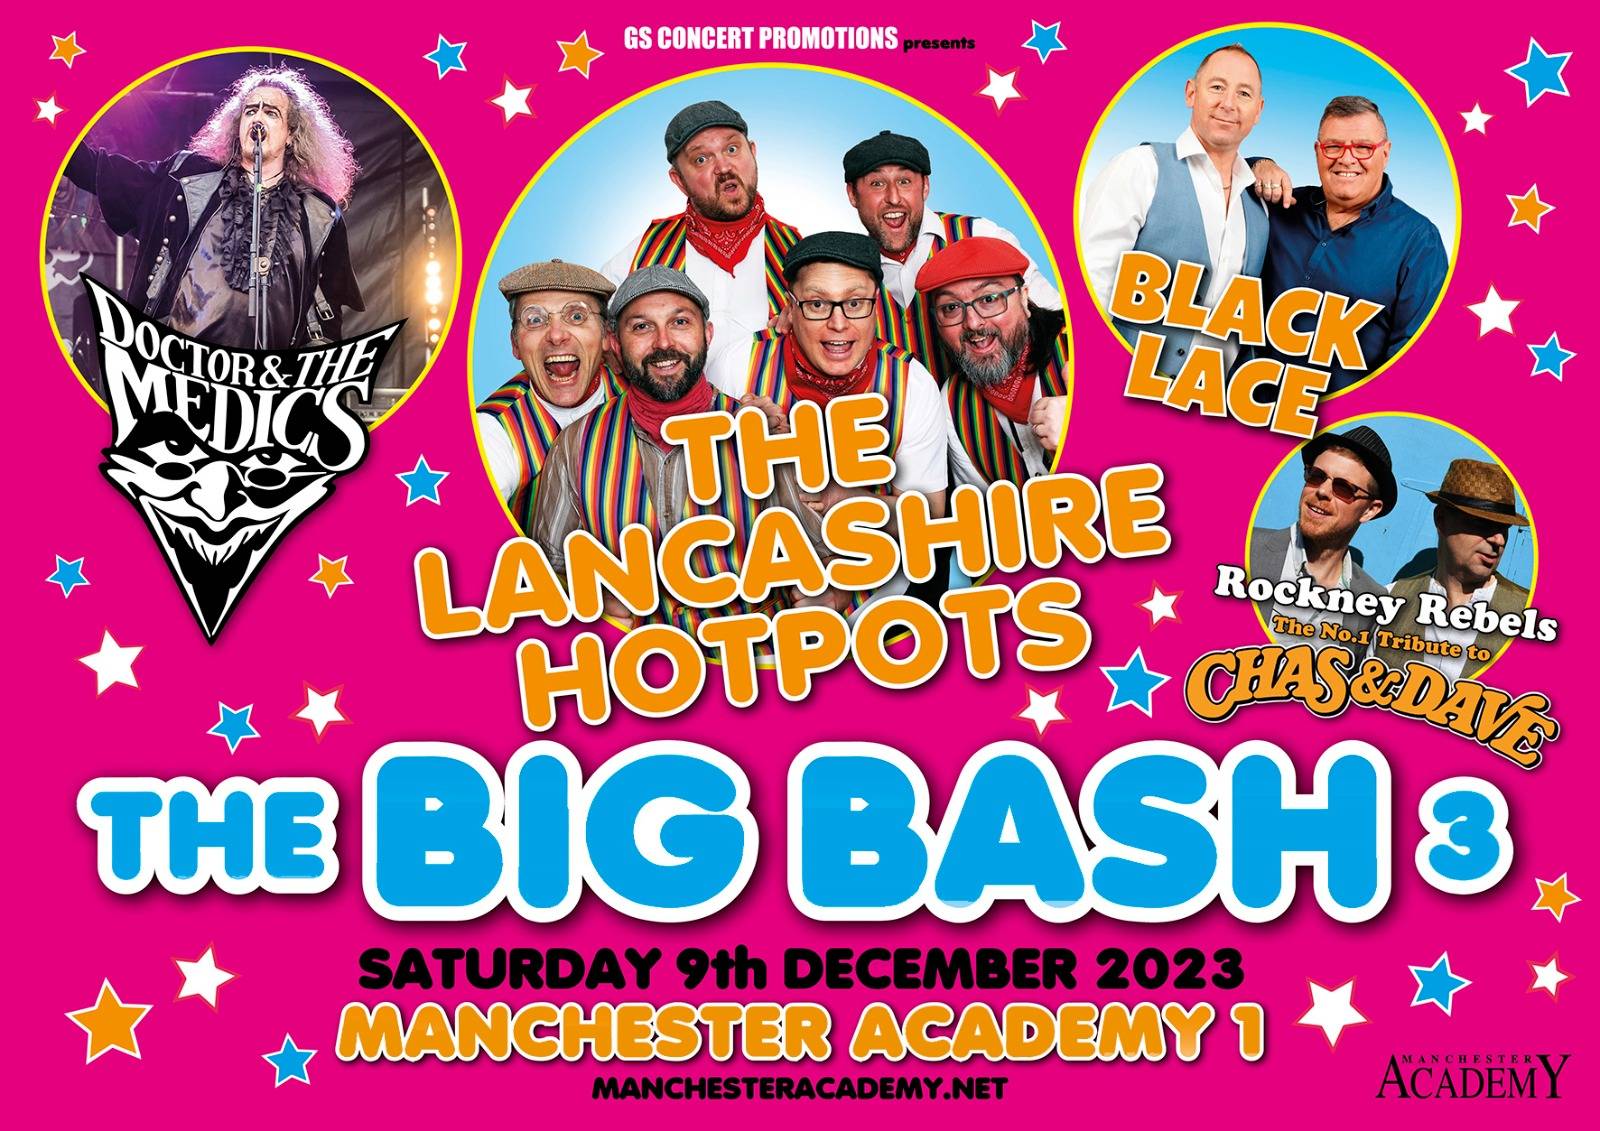 Big Bash 3 promotional image featuring The Lancashire Hotpots, Doctor & The Medics, Black Lace and Rockney Rebels